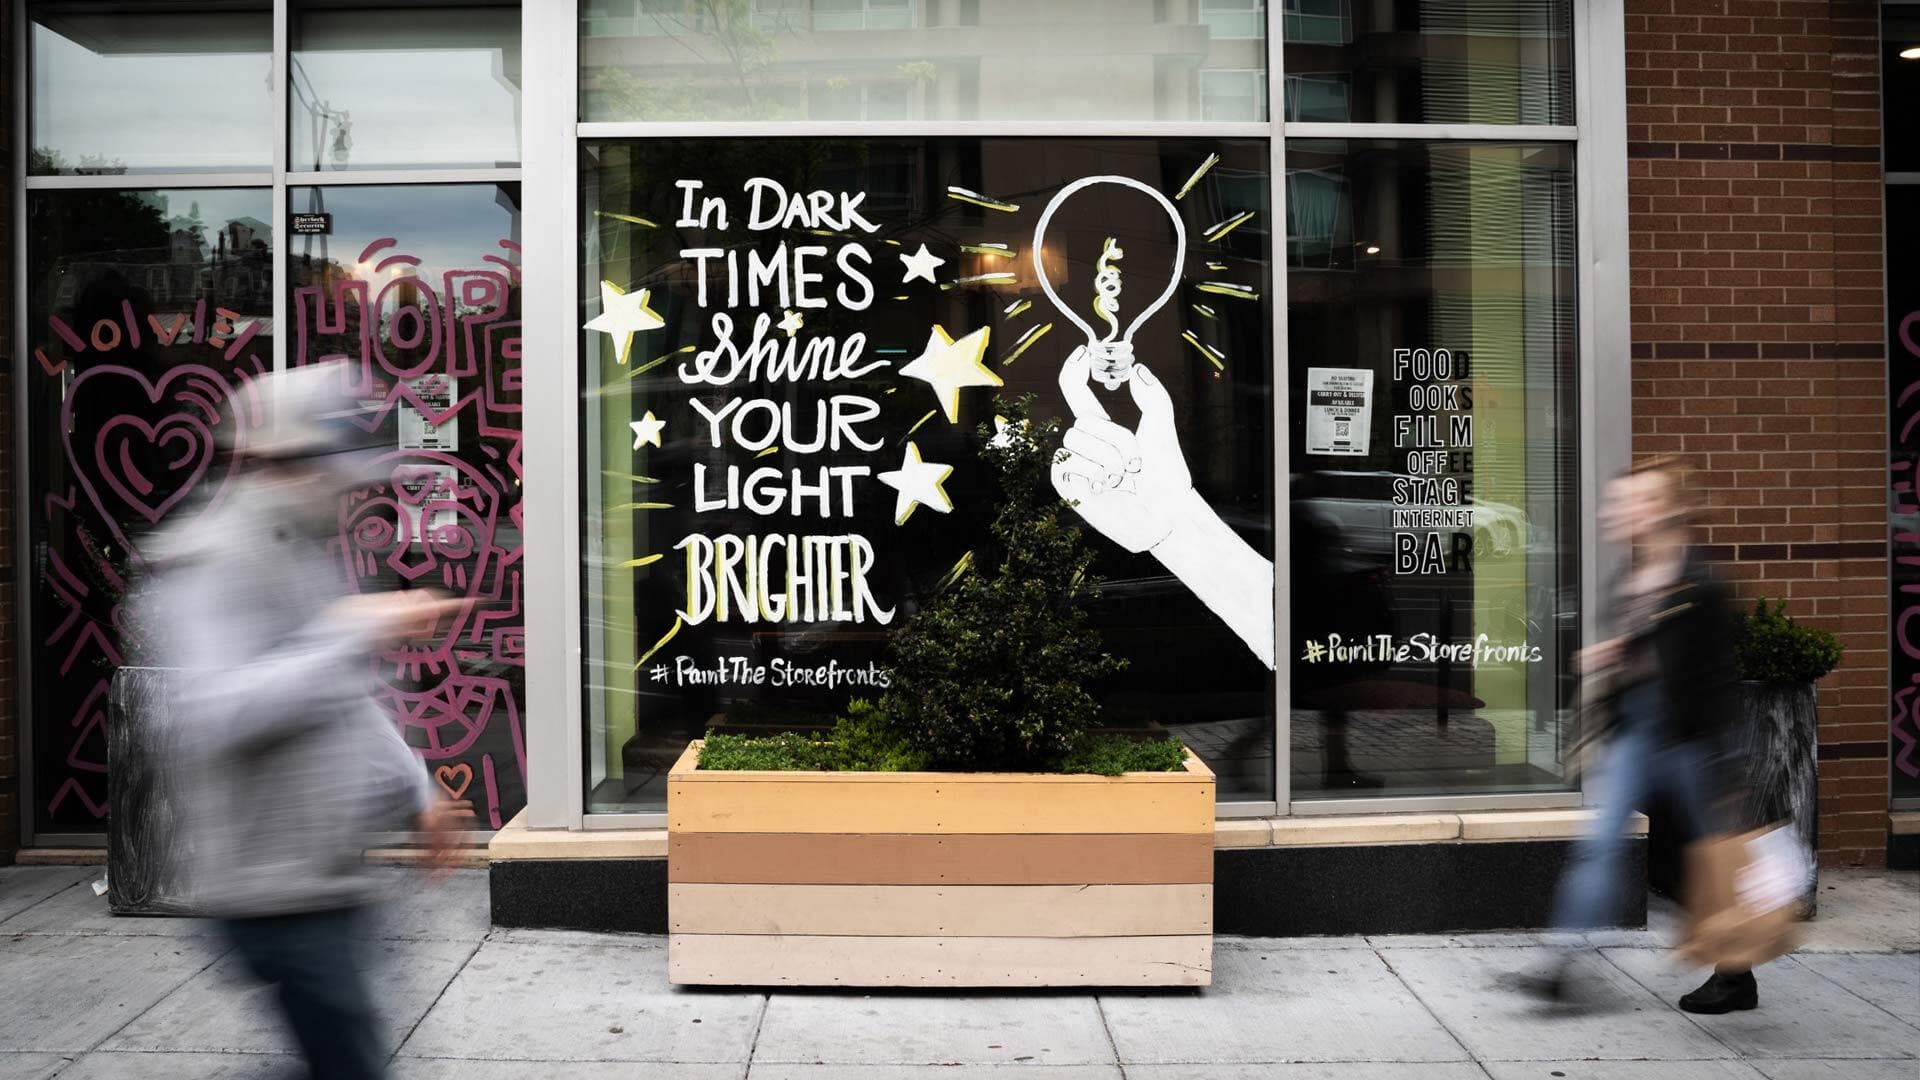 Window with “In Dark Times, Shine Your Light Brighter” painted on it